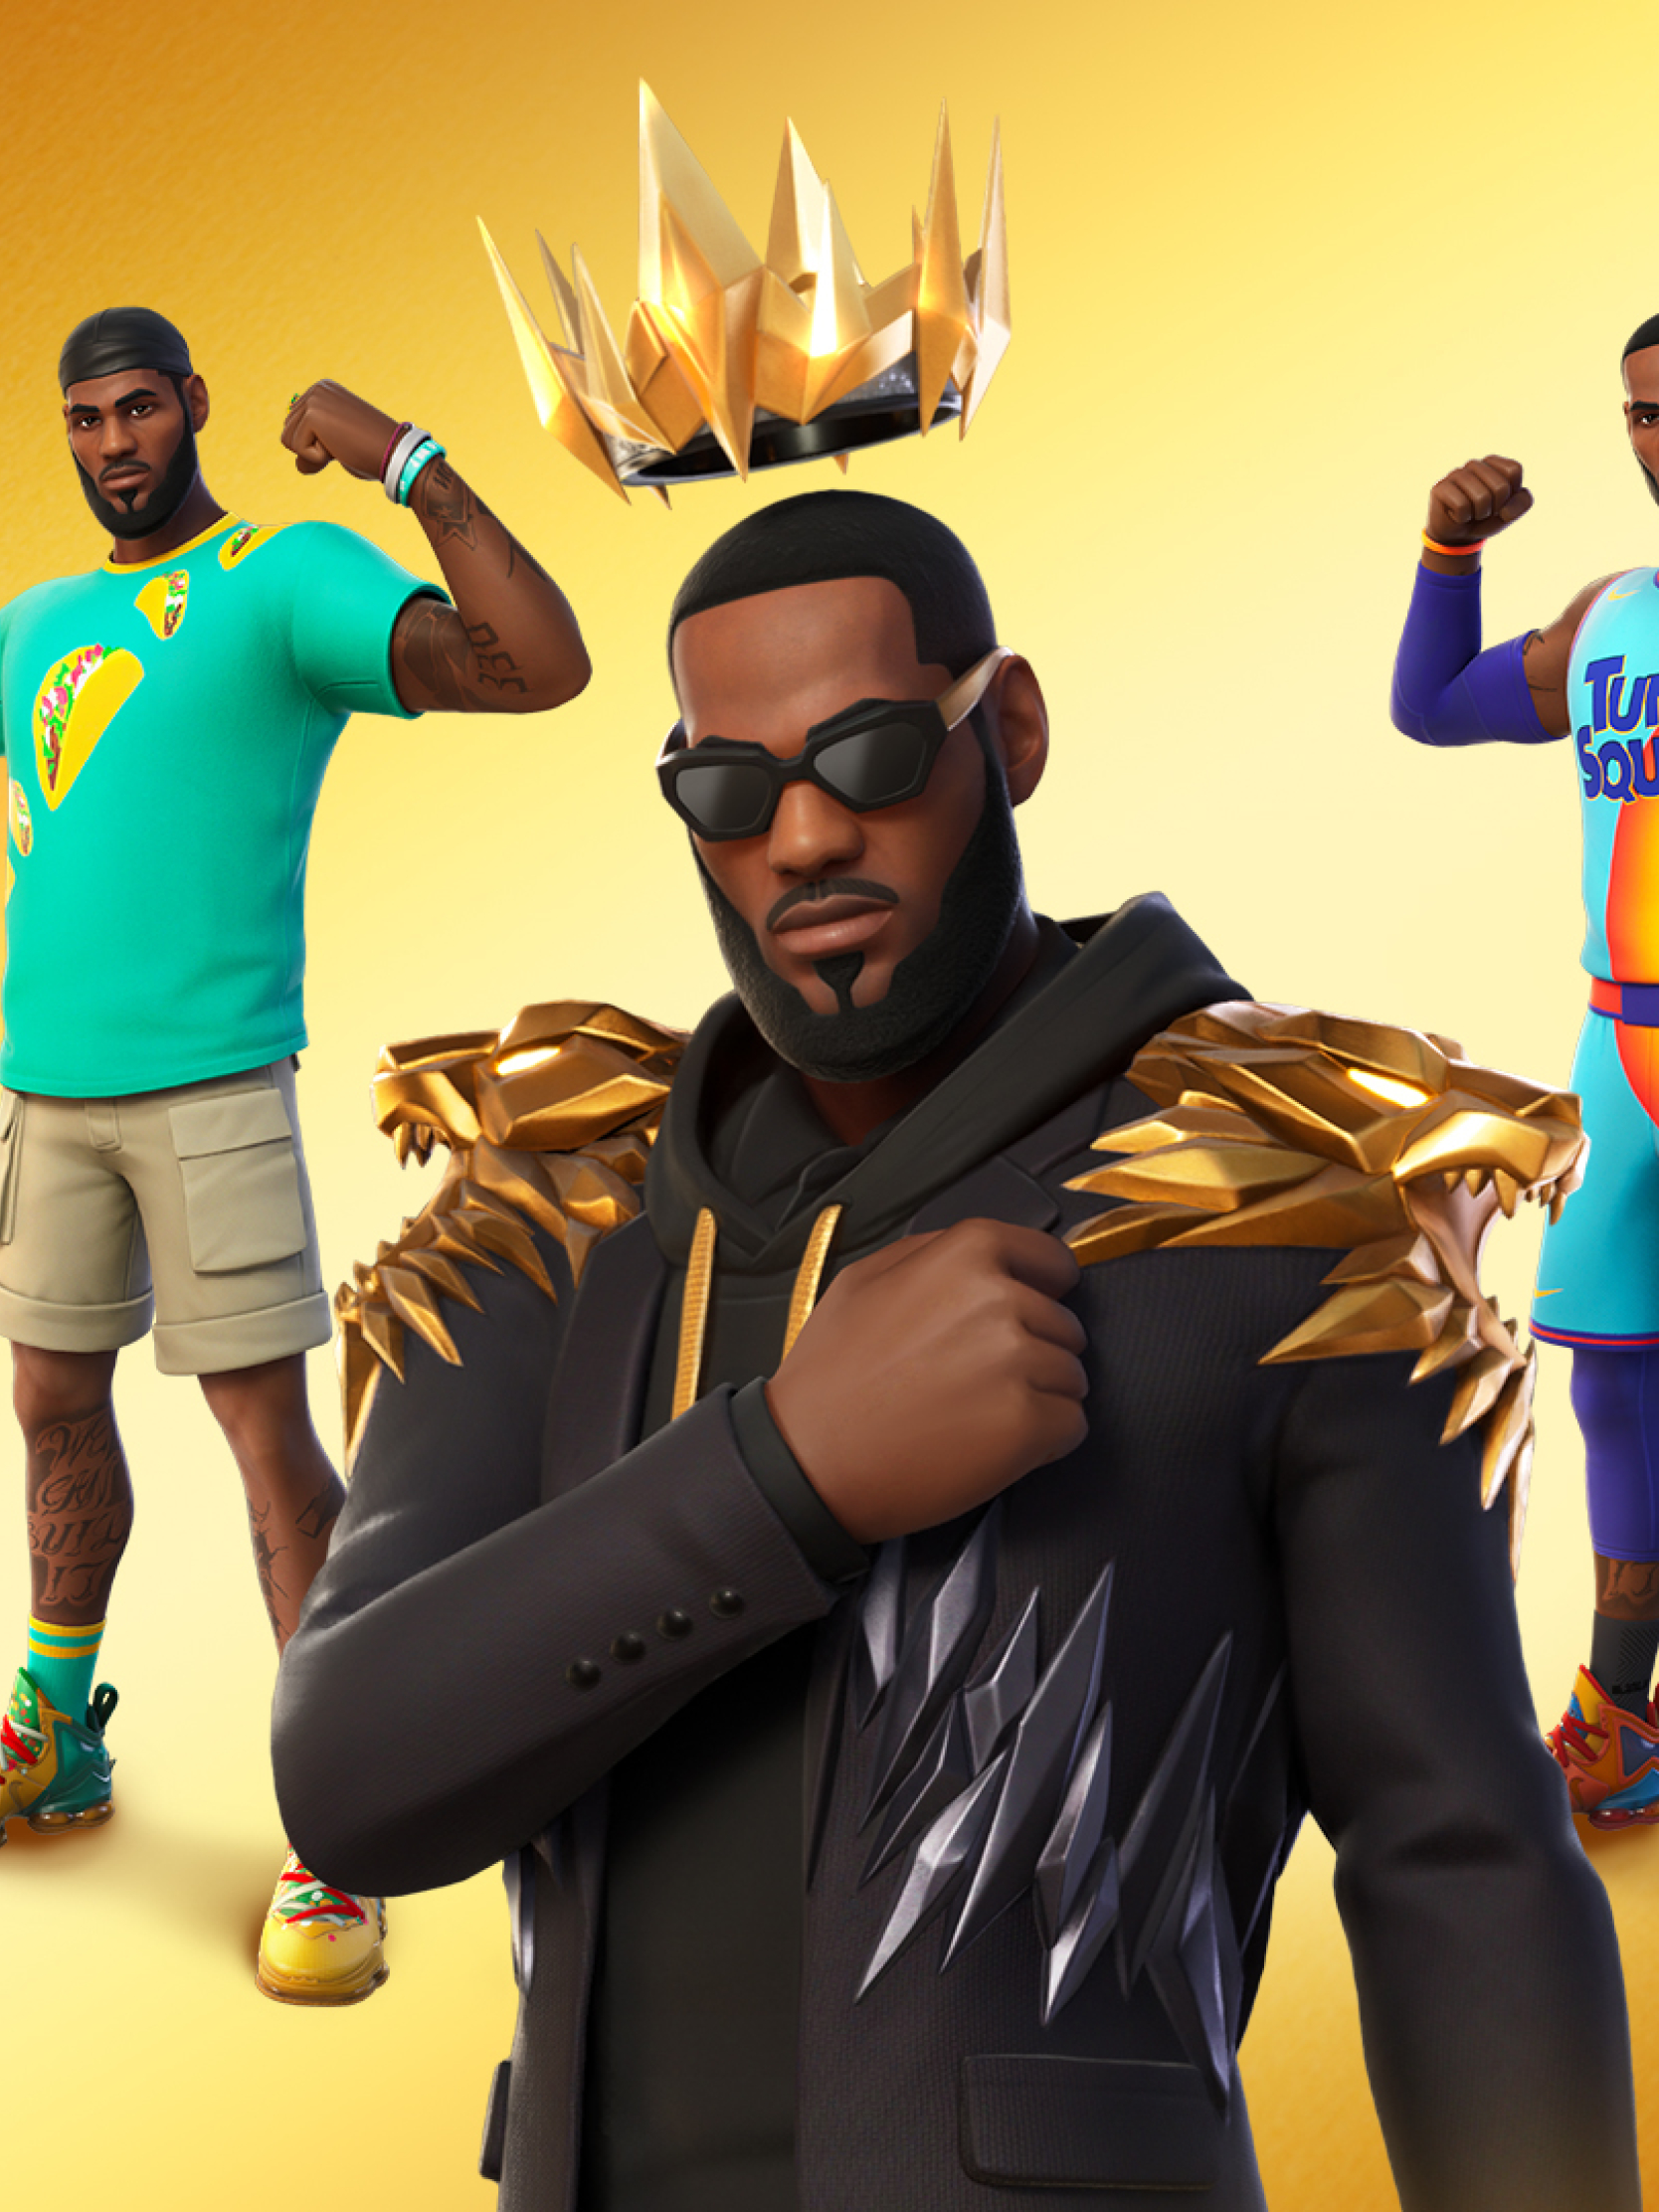 prompthunt: lebron james as an anime character